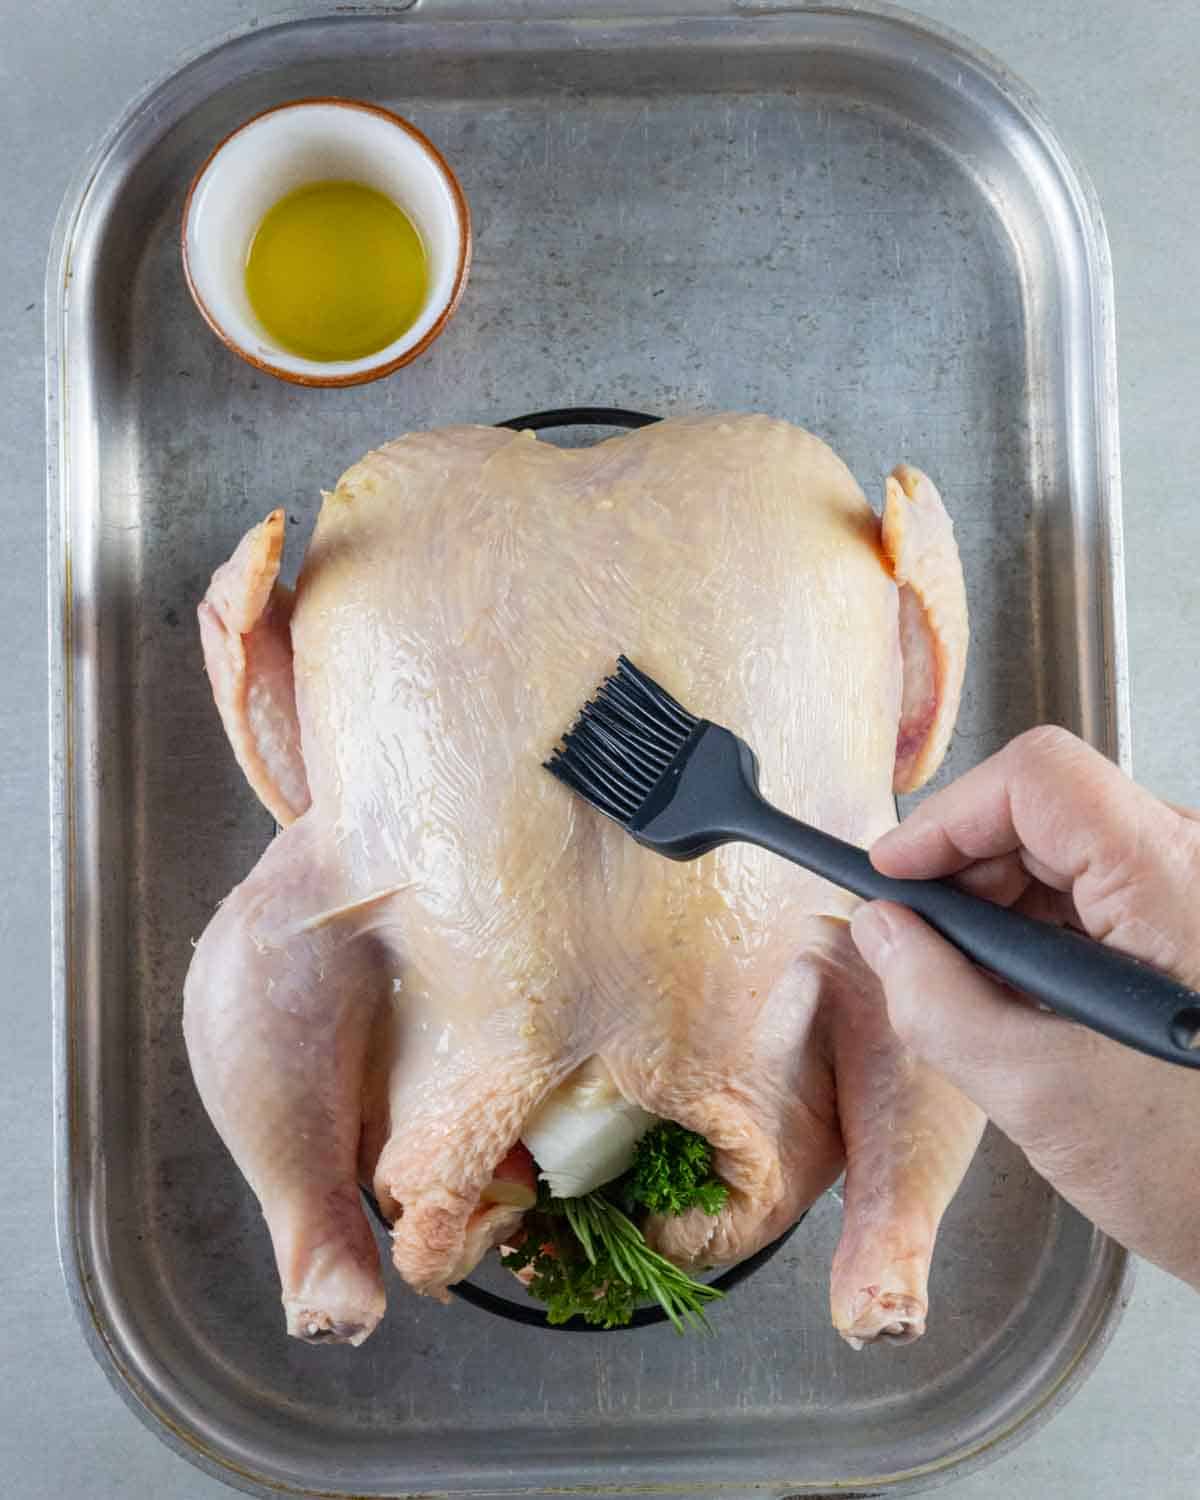 Whole chicken in a roasting pan being brushed with melted butter.